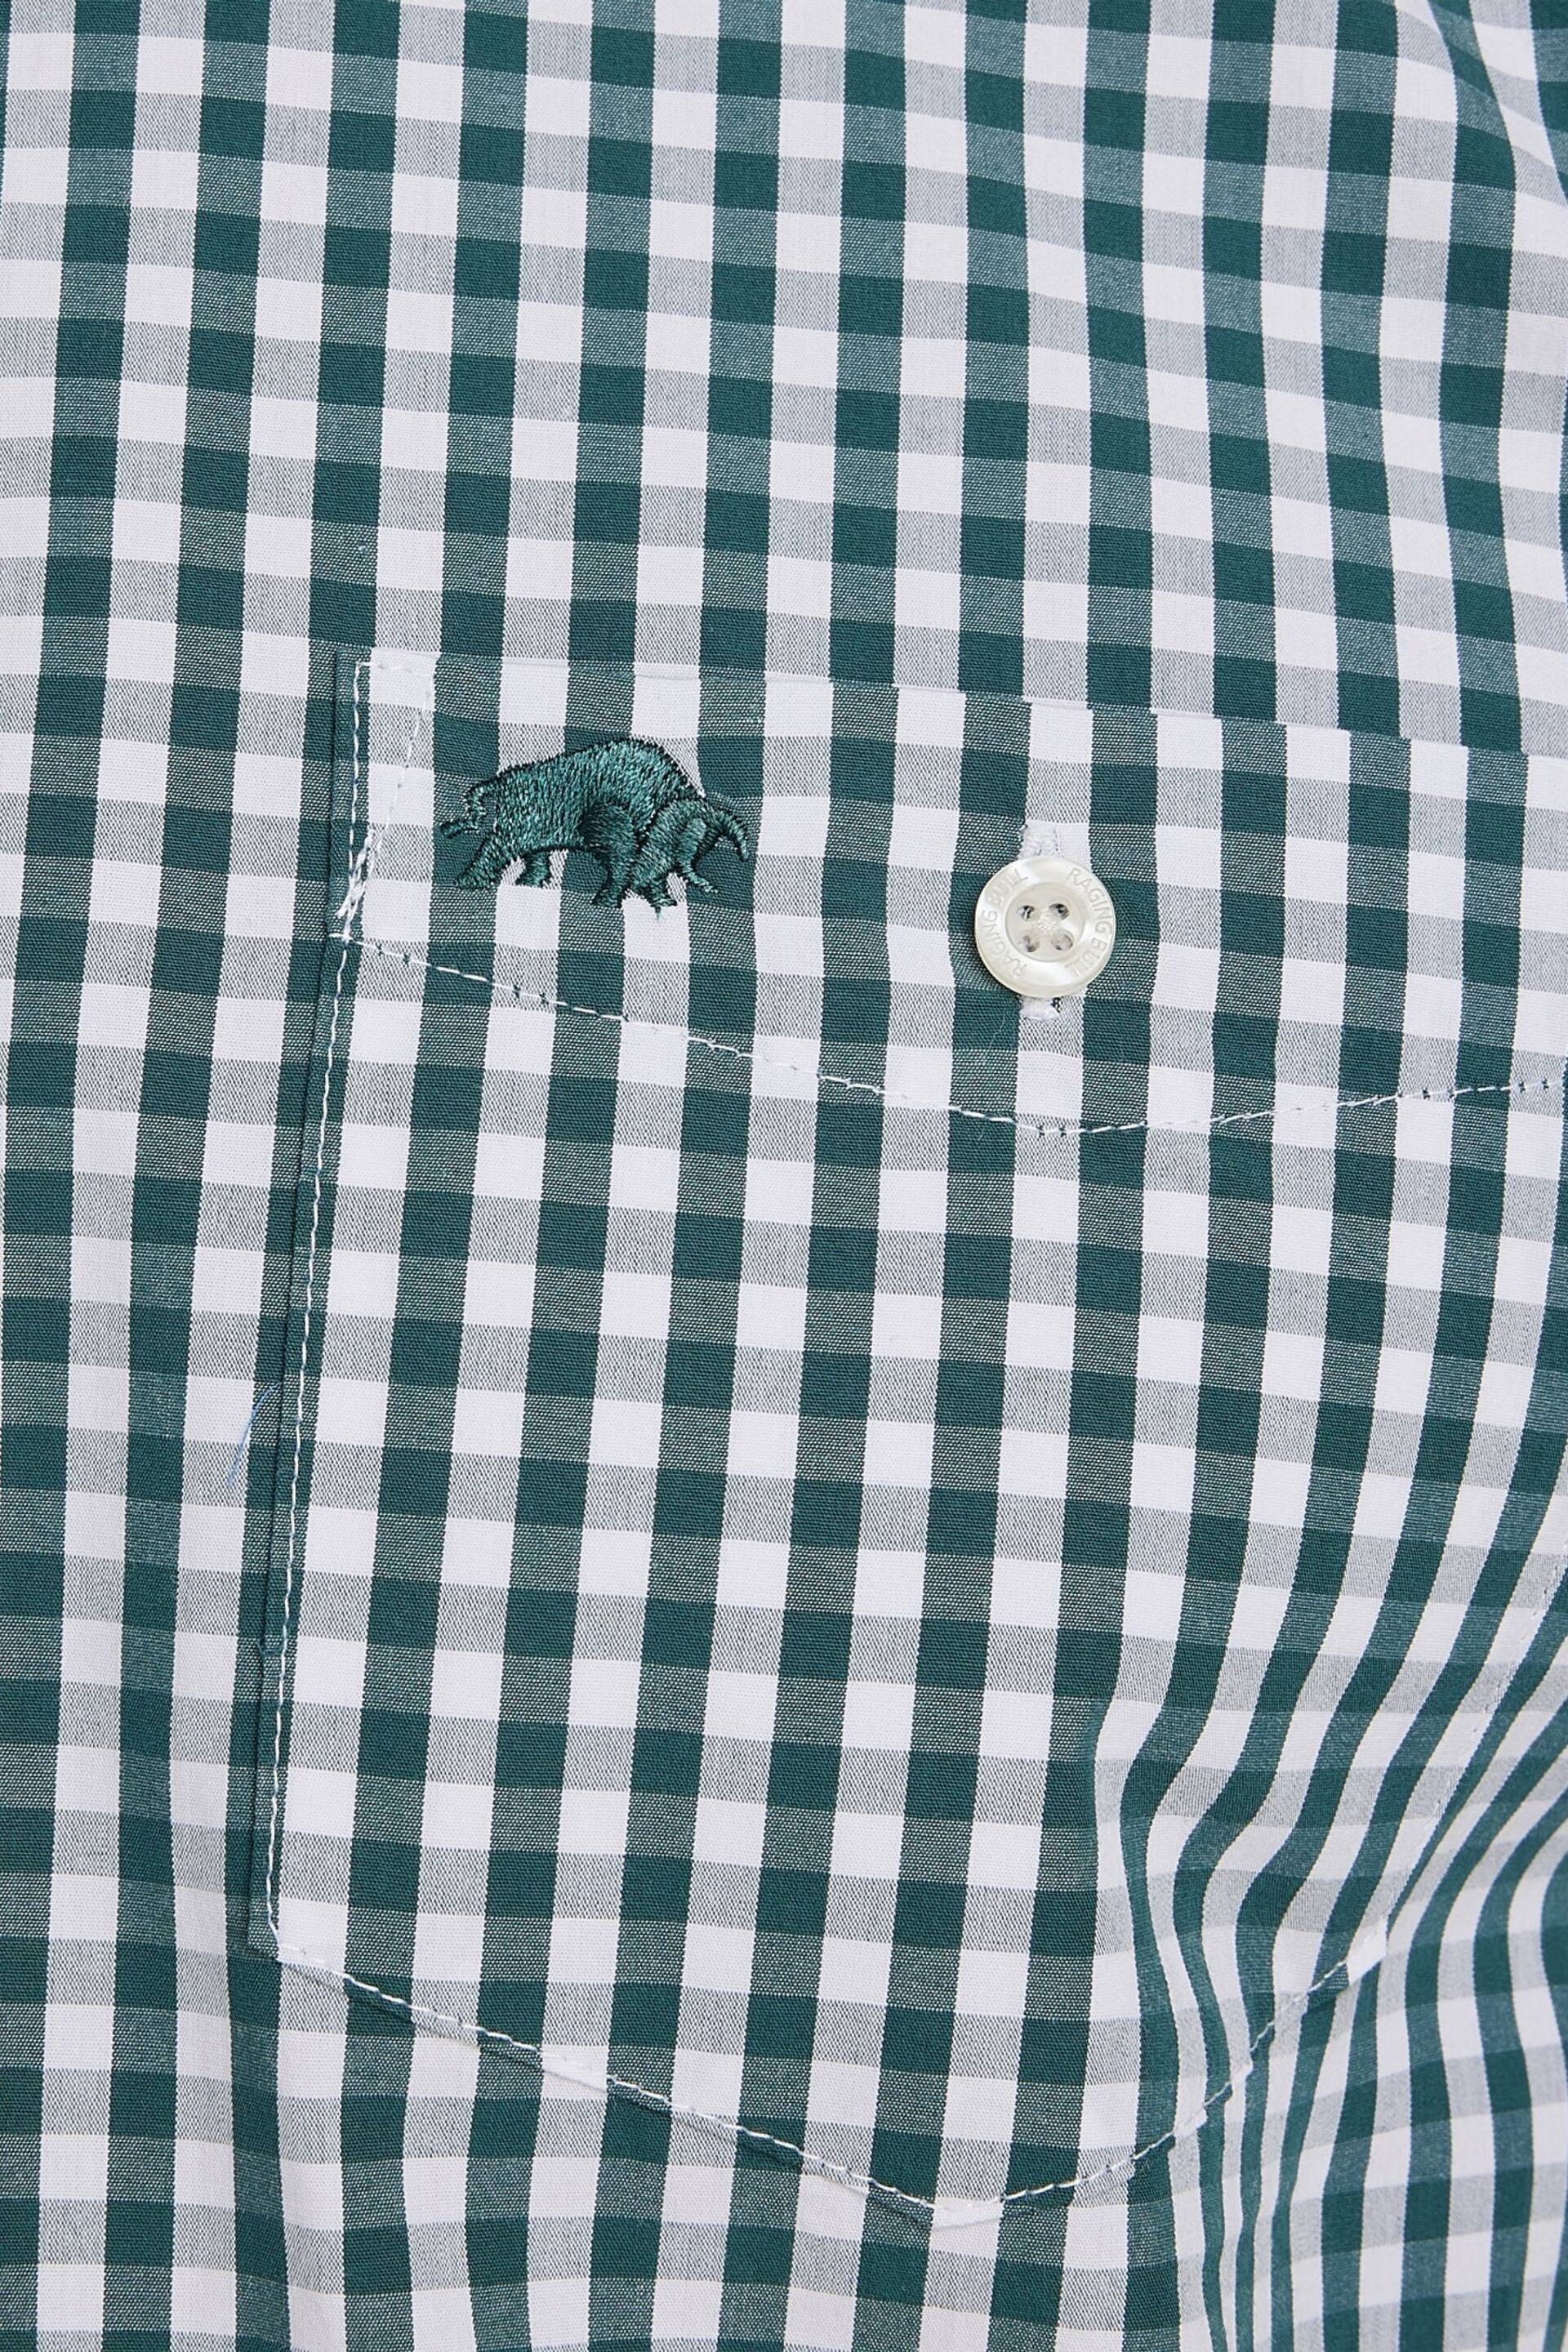 Long Sleeve Green Classic Gingham Shirt - Image 7 of 7